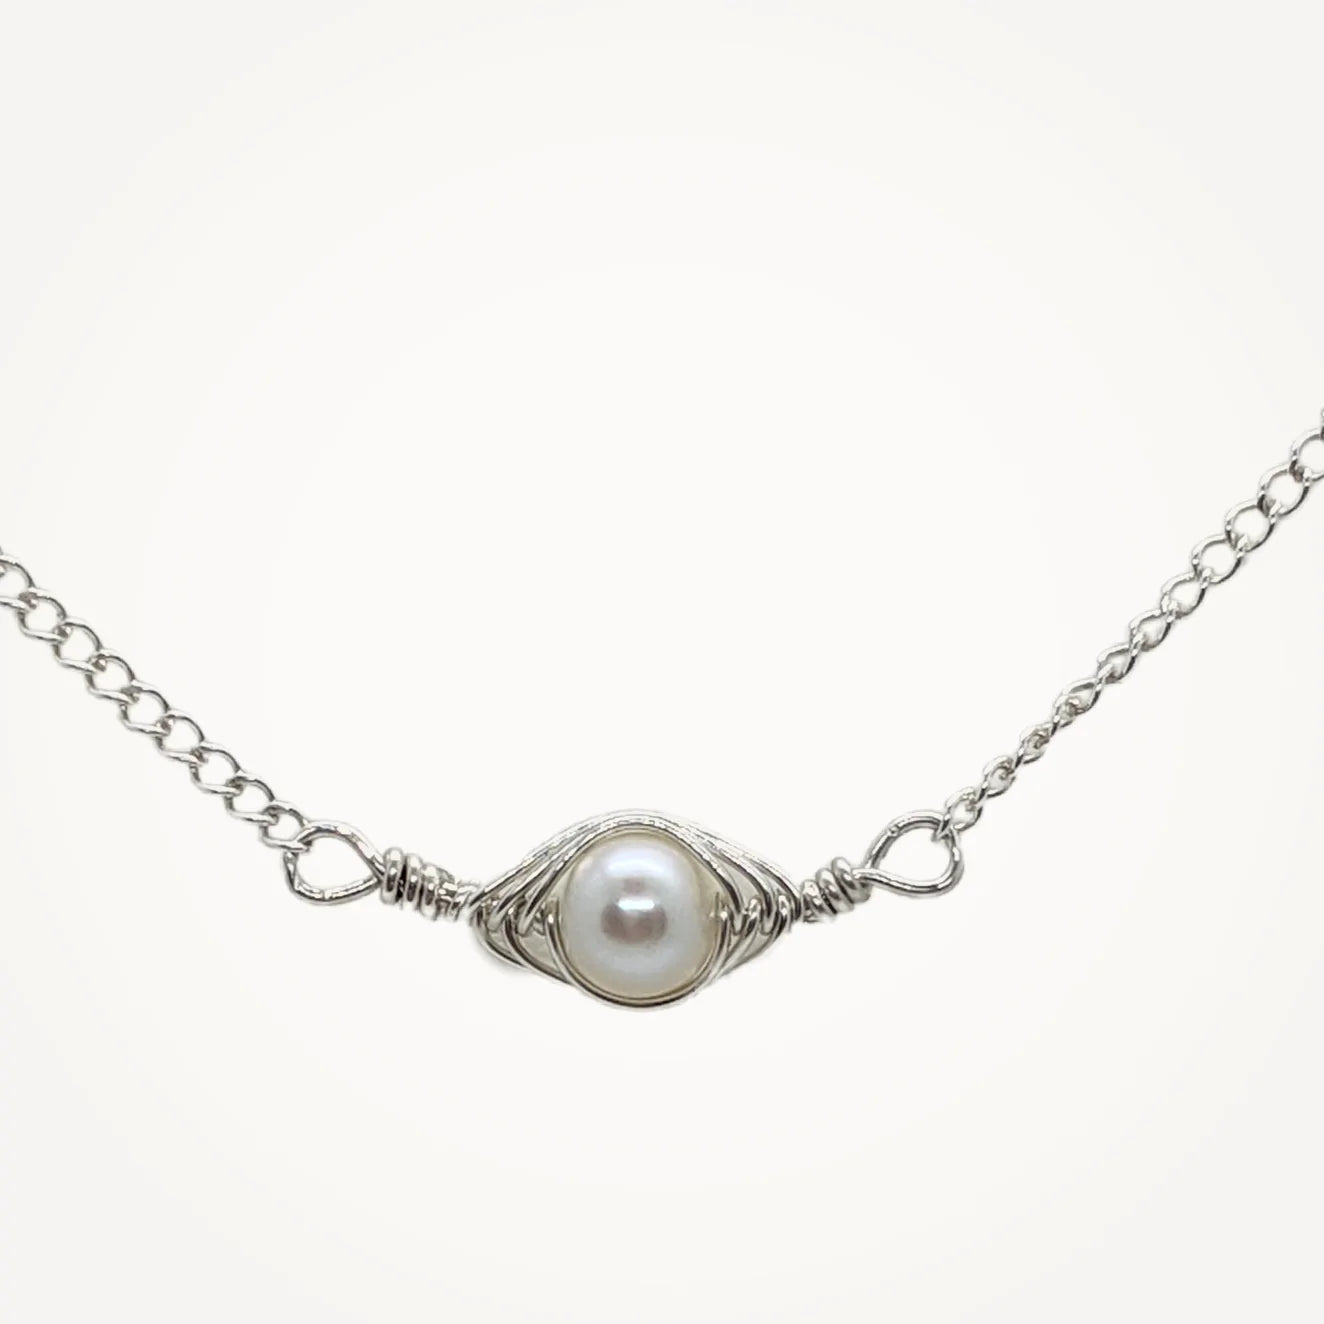 Peapod Necklace | Tiny Sterling Silver